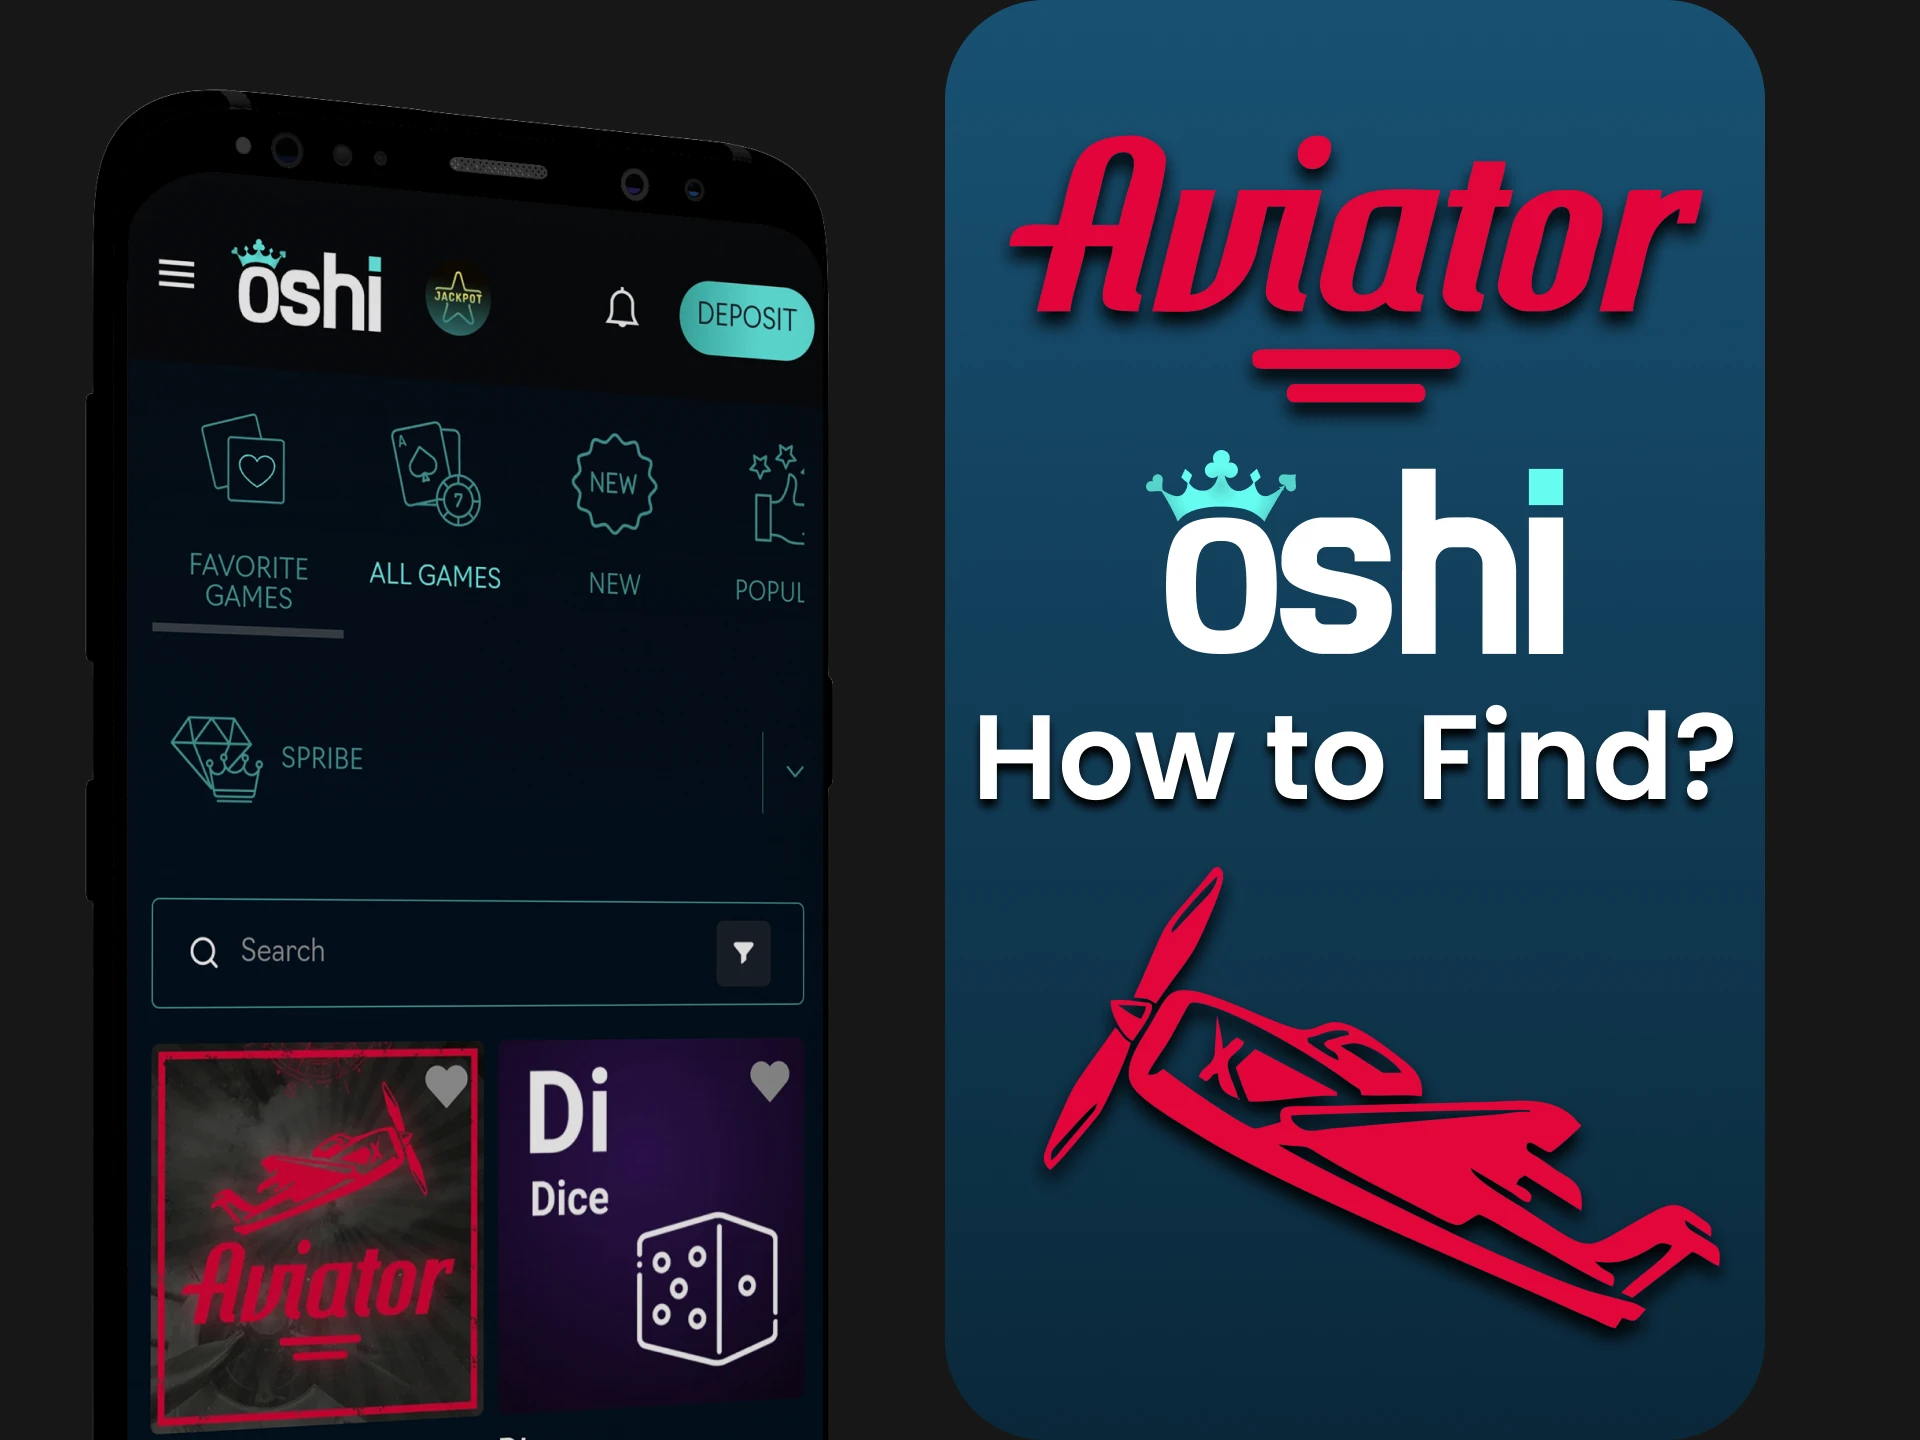 Find Aviator in the casino section of the Oshi Casino app.